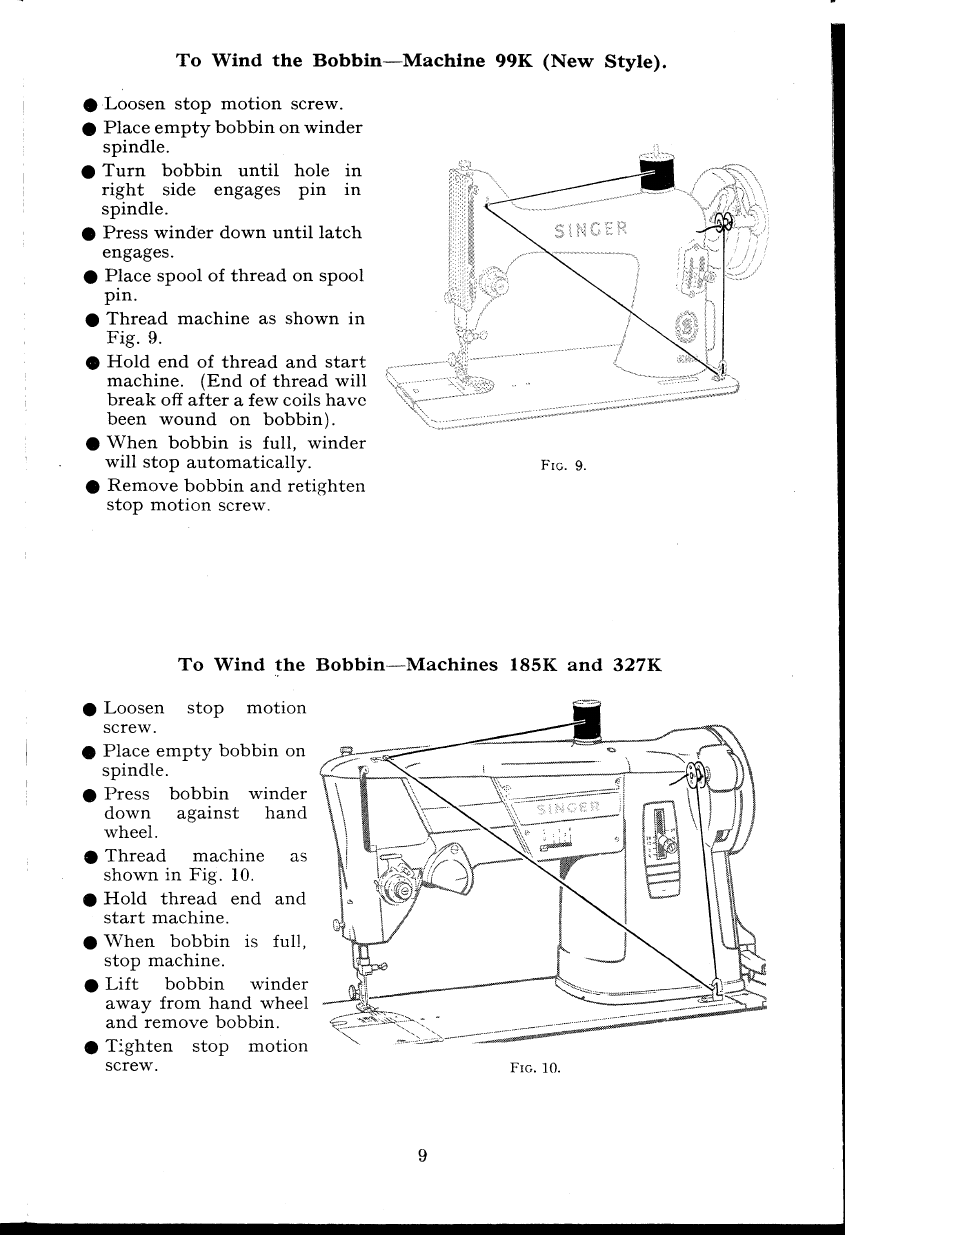 To wind the bobbin—machines 185k and 327k | SINGER 404K User Manual | Page 9 / 78